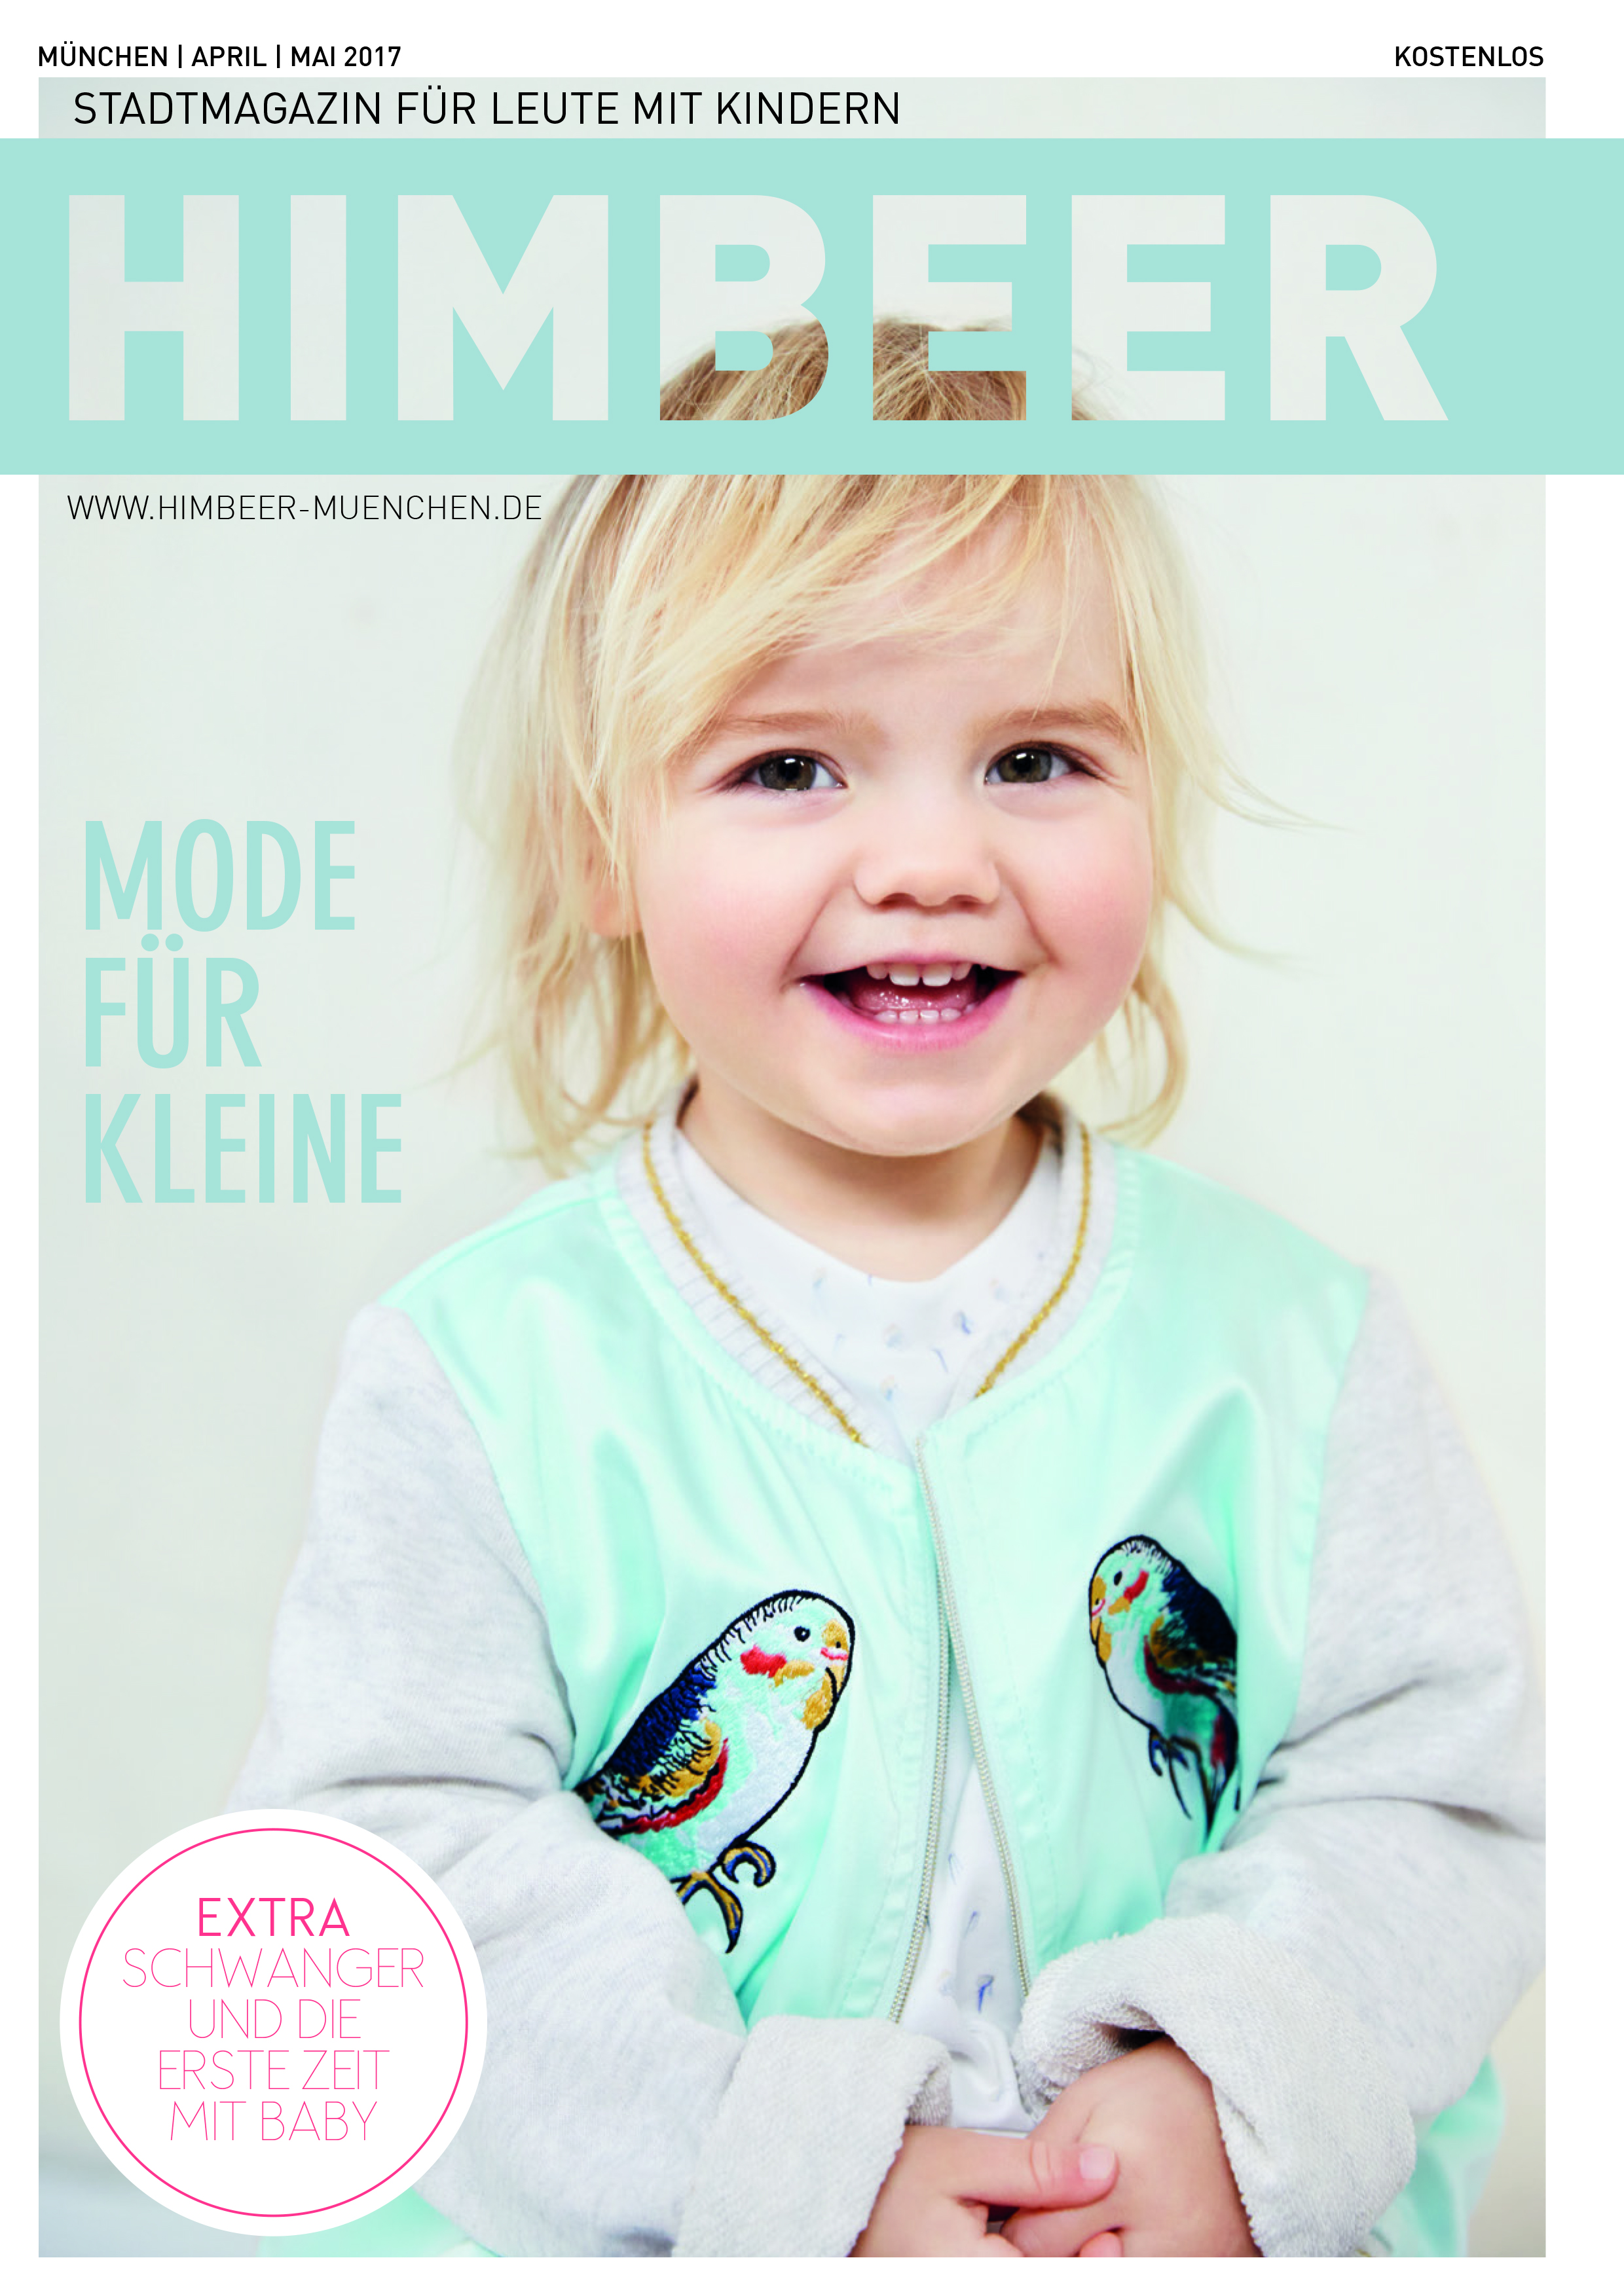 HIMBEER31 MUC Cover